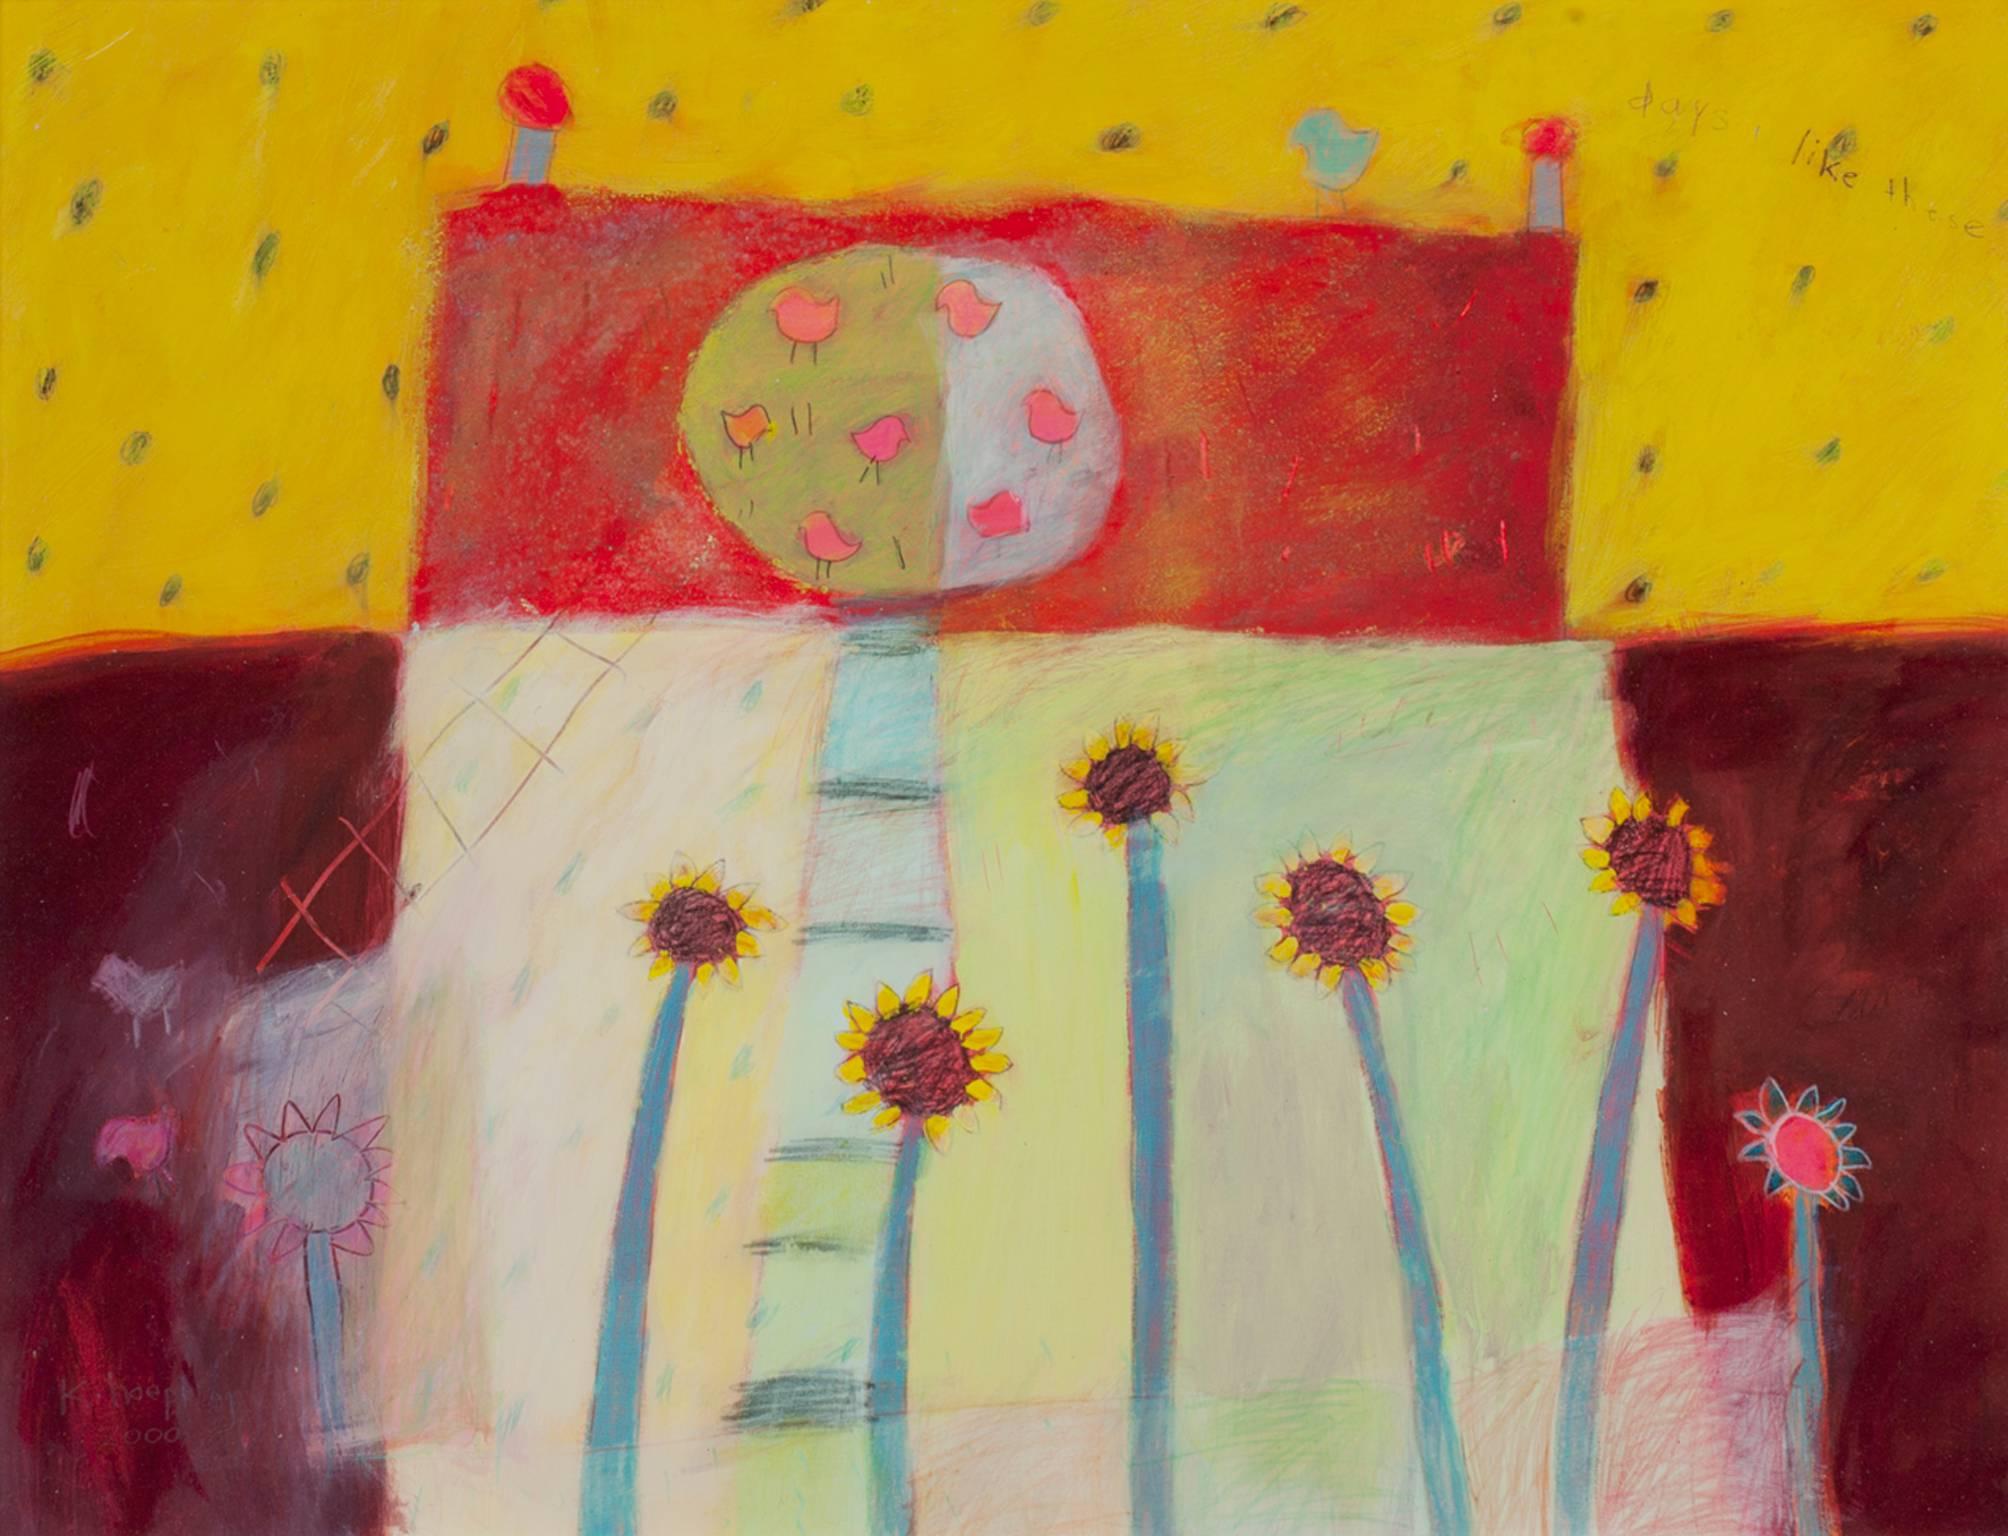 "Days Like These," an Acrylic on Paper by Karen Hoepting 